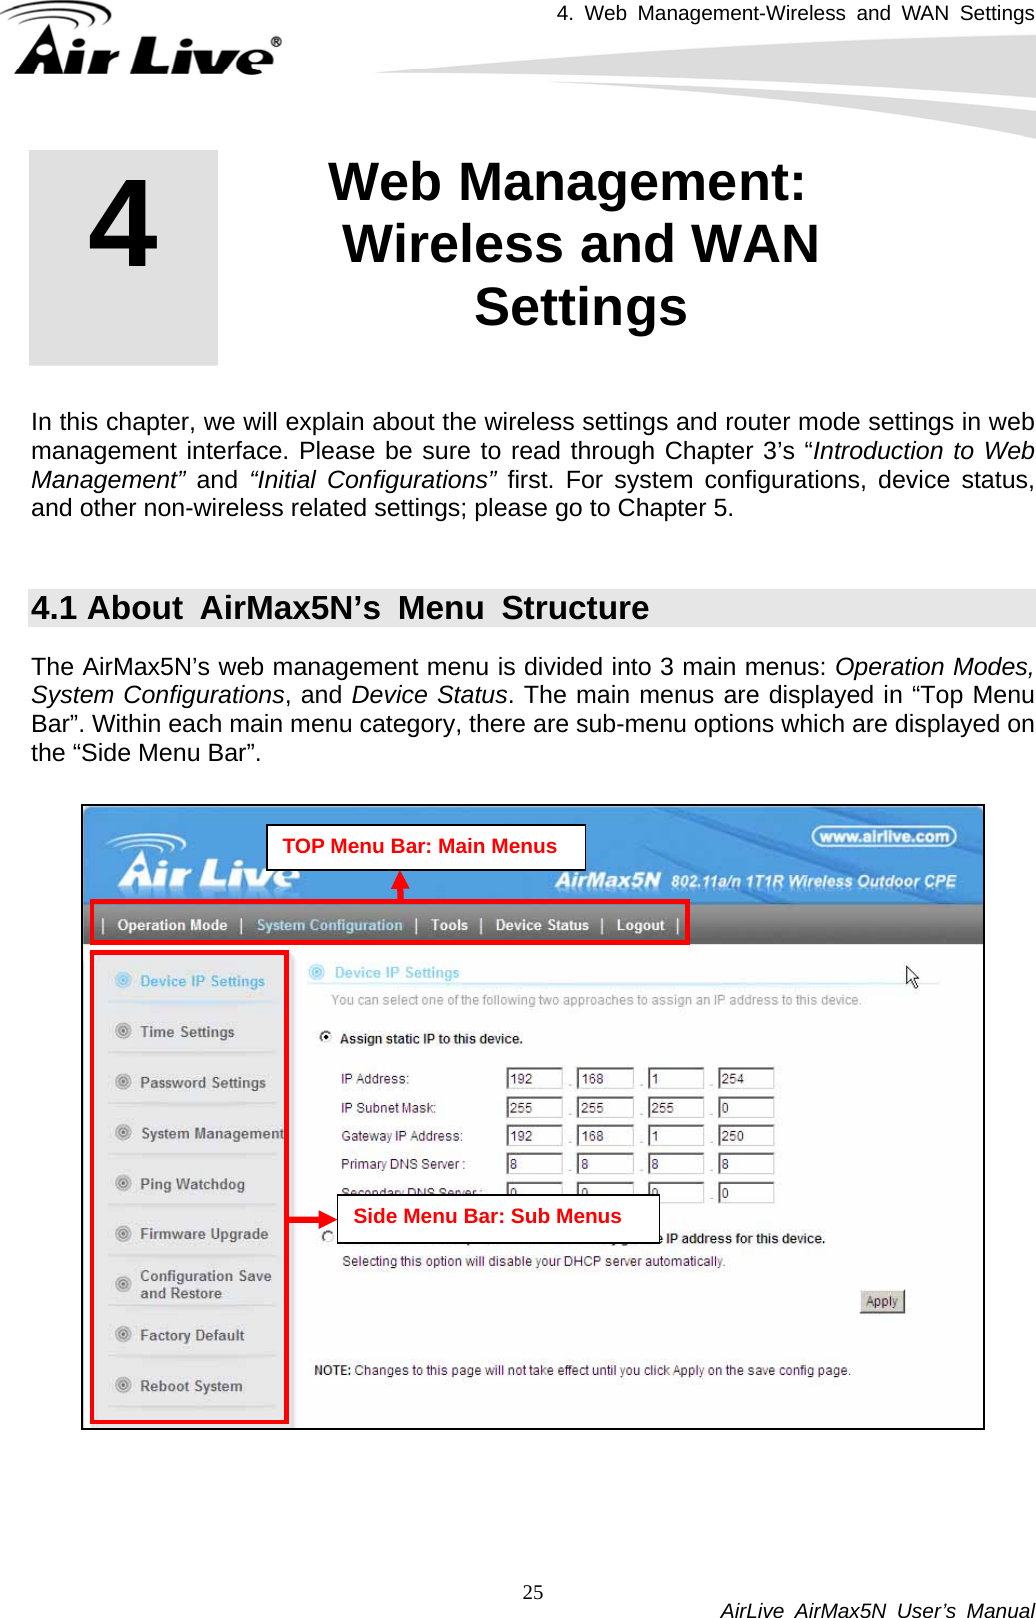 4. Web Management-Wireless and WAN Settings           AirLive AirMax5N User’s Manual 25         In this chapter, we will explain about the wireless settings and router mode settings in web management interface. Please be sure to read through Chapter 3’s “Introduction to Web Management”  and “Initial Configurations” first. For system configurations, device status, and other non-wireless related settings; please go to Chapter 5.    4.1 About AirMax5N’s Menu Structure The AirMax5N’s web management menu is divided into 3 main menus: Operation Modes, System Configurations, and Device Status. The main menus are displayed in “Top Menu Bar”. Within each main menu category, there are sub-menu options which are displayed on the “Side Menu Bar”.      4  4. Web Management: Wireless and WAN Settings  TOP Menu Bar: Main Menus Side Menu Bar: Sub Menus 